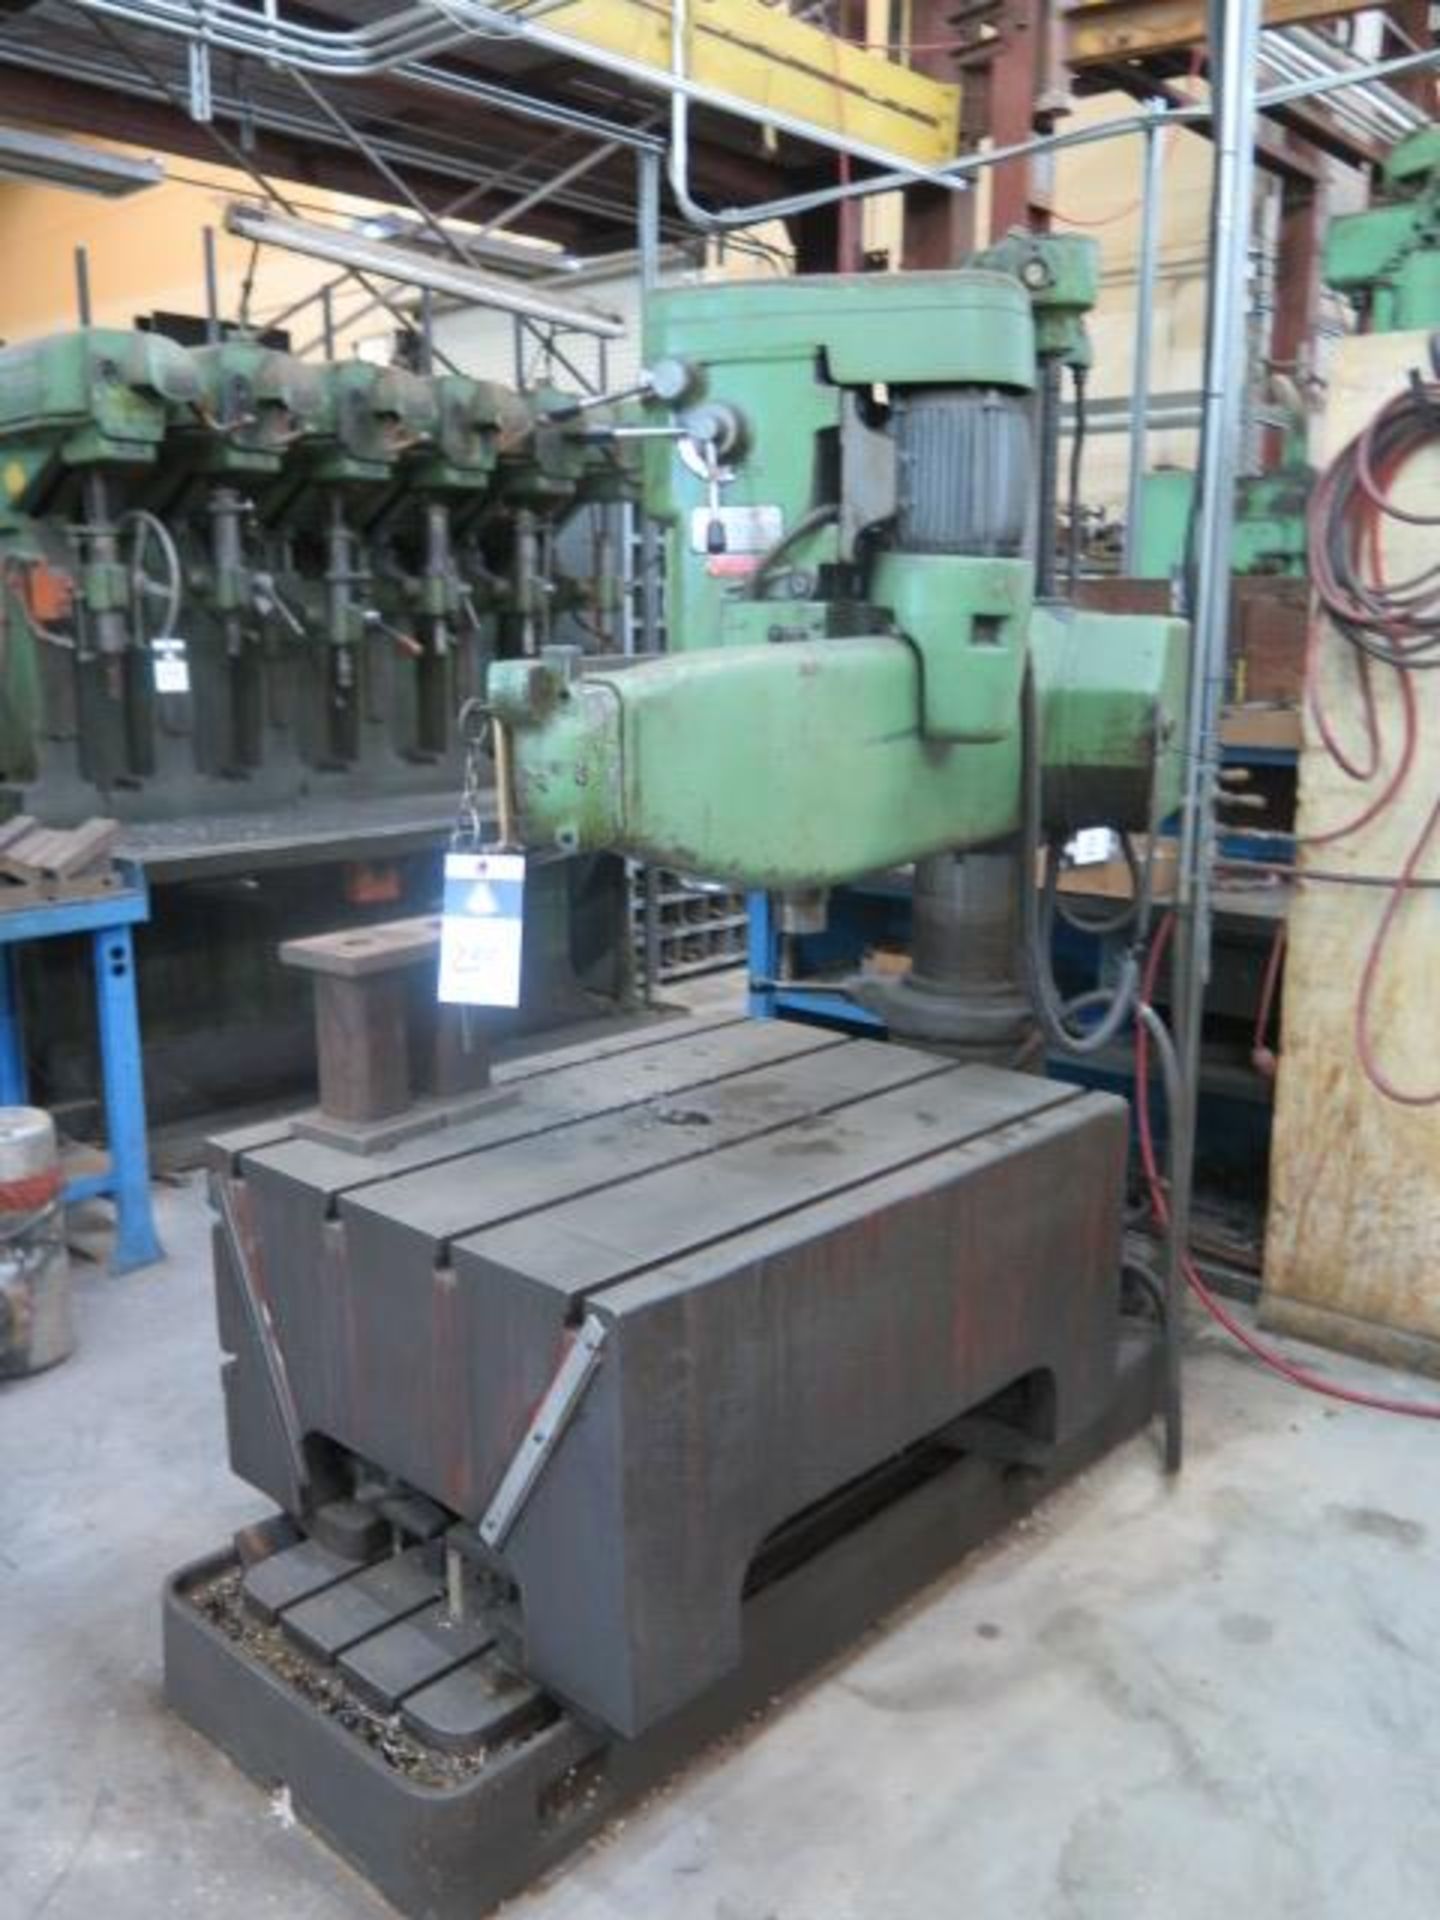 Summit 8” Column x 42” Radial Arm Drill w/ 60-2000 RPM, Power Column and Feeds, SOLD AS IS - Image 3 of 10